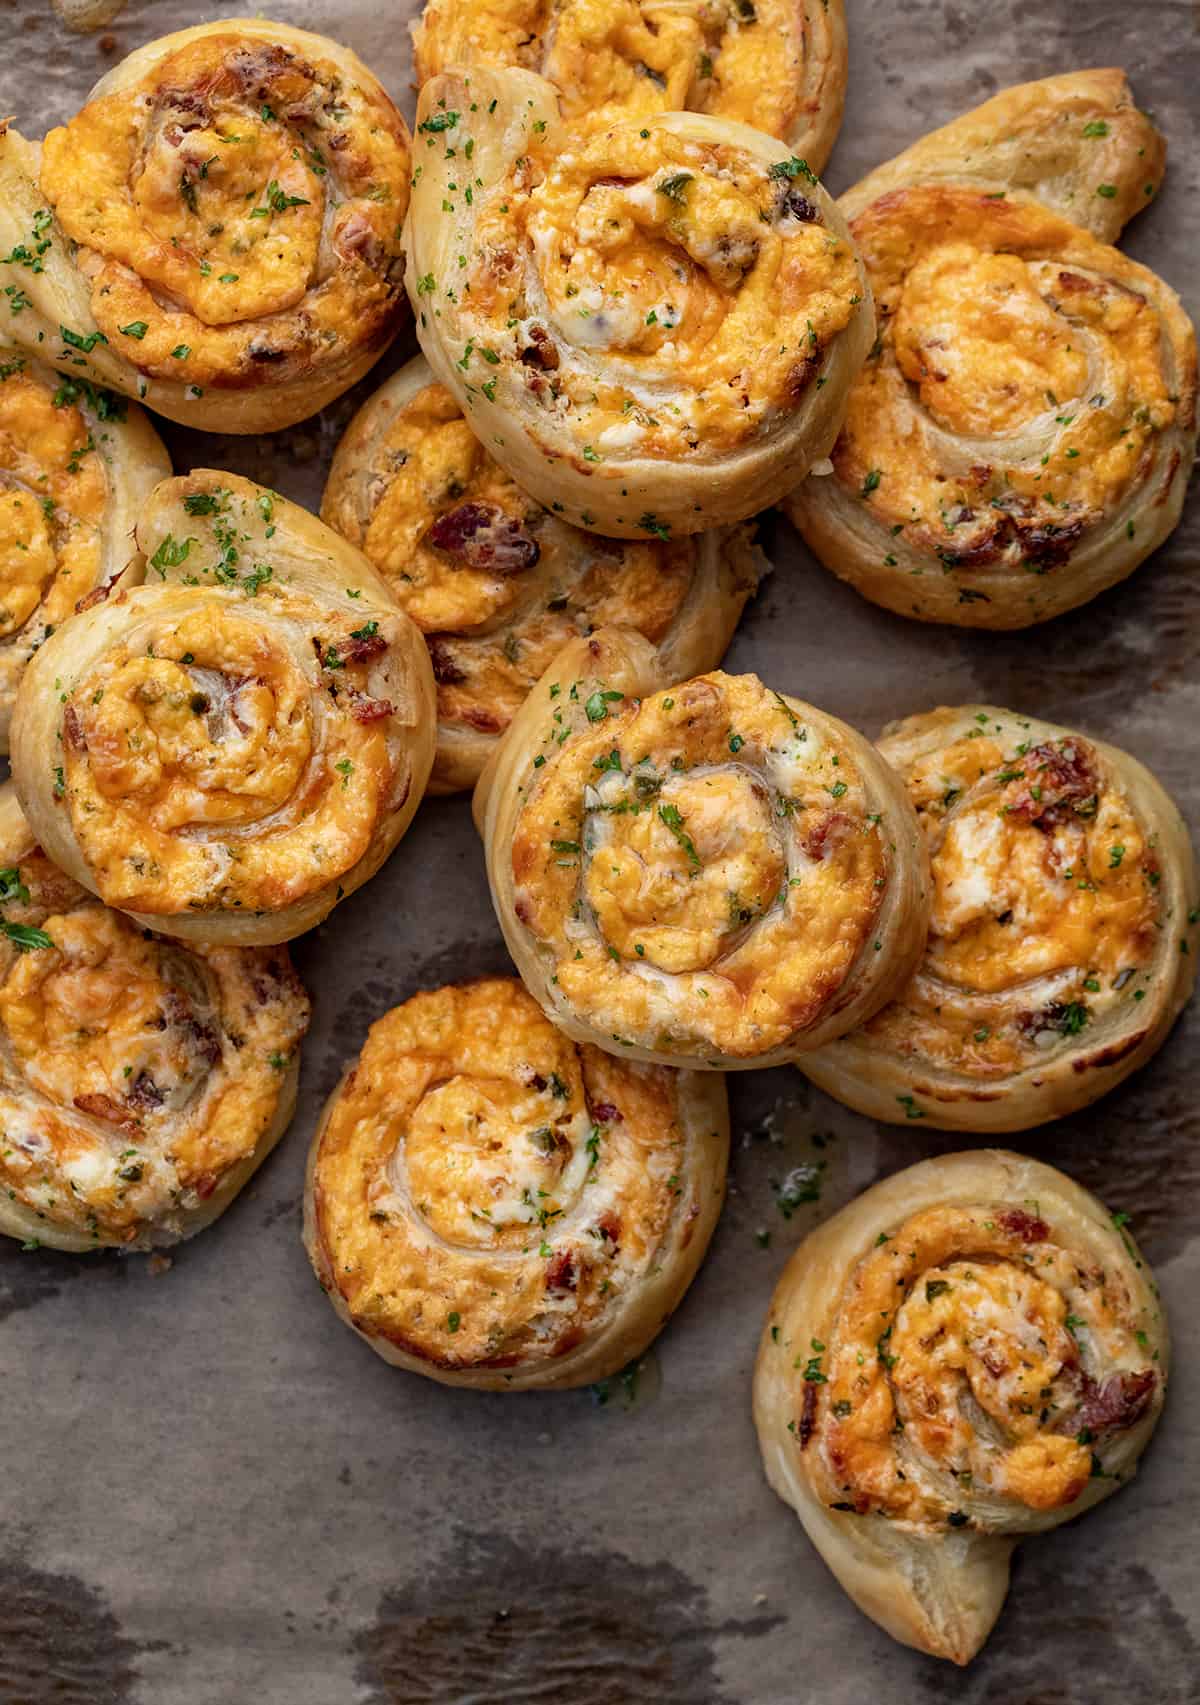 Group of Jalapeno Popper Pinwheels on a Parchment Paper